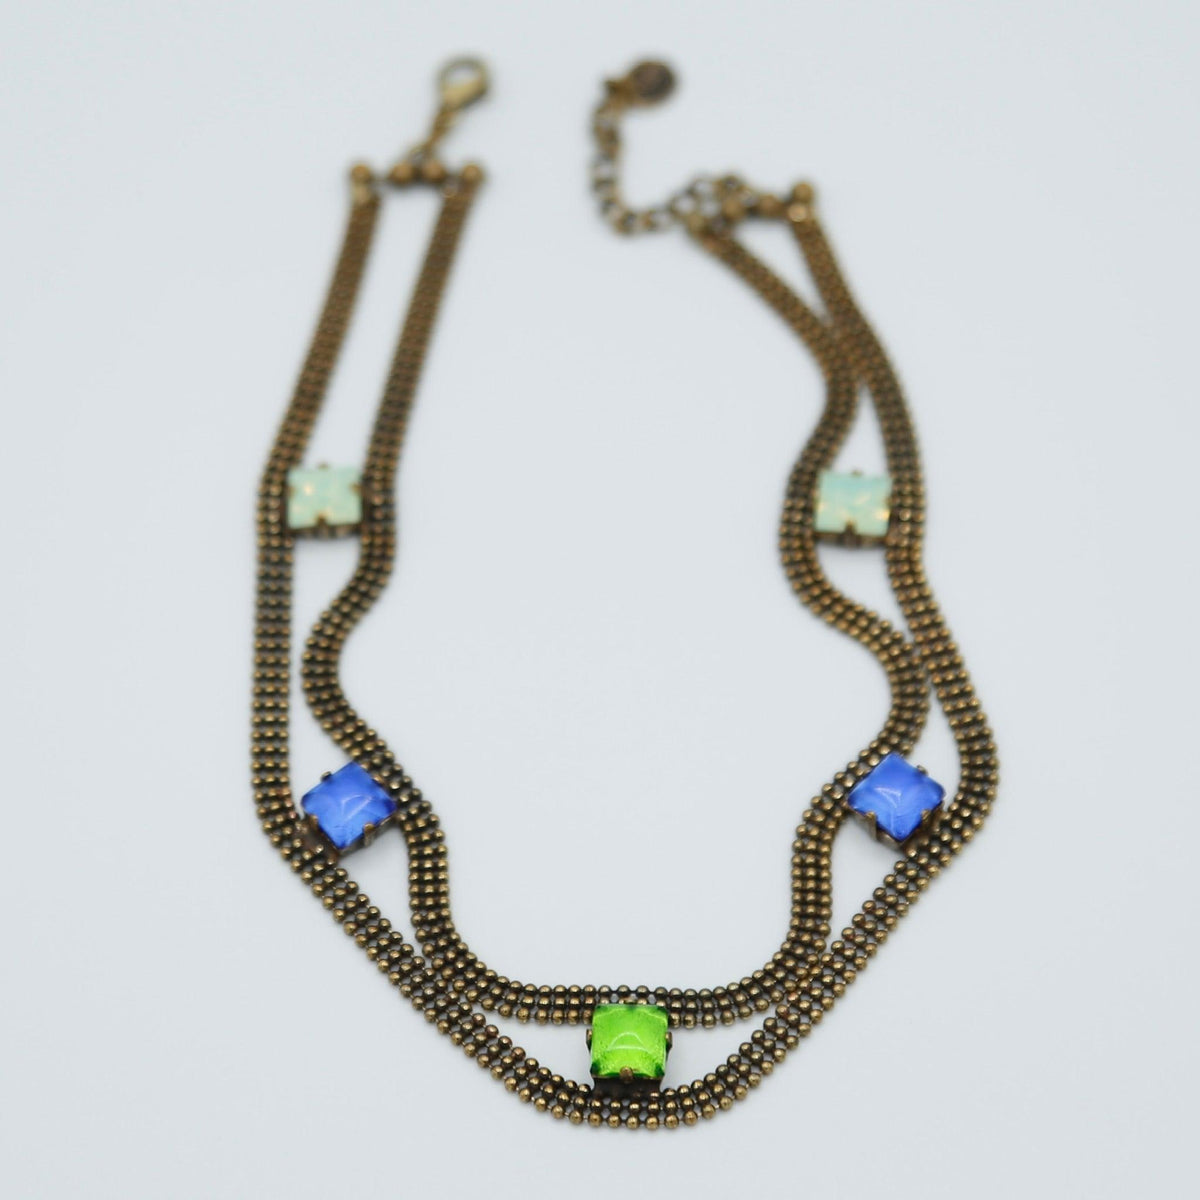 Blue and Lime Narcissa Choker with Crystals - Vita Isola